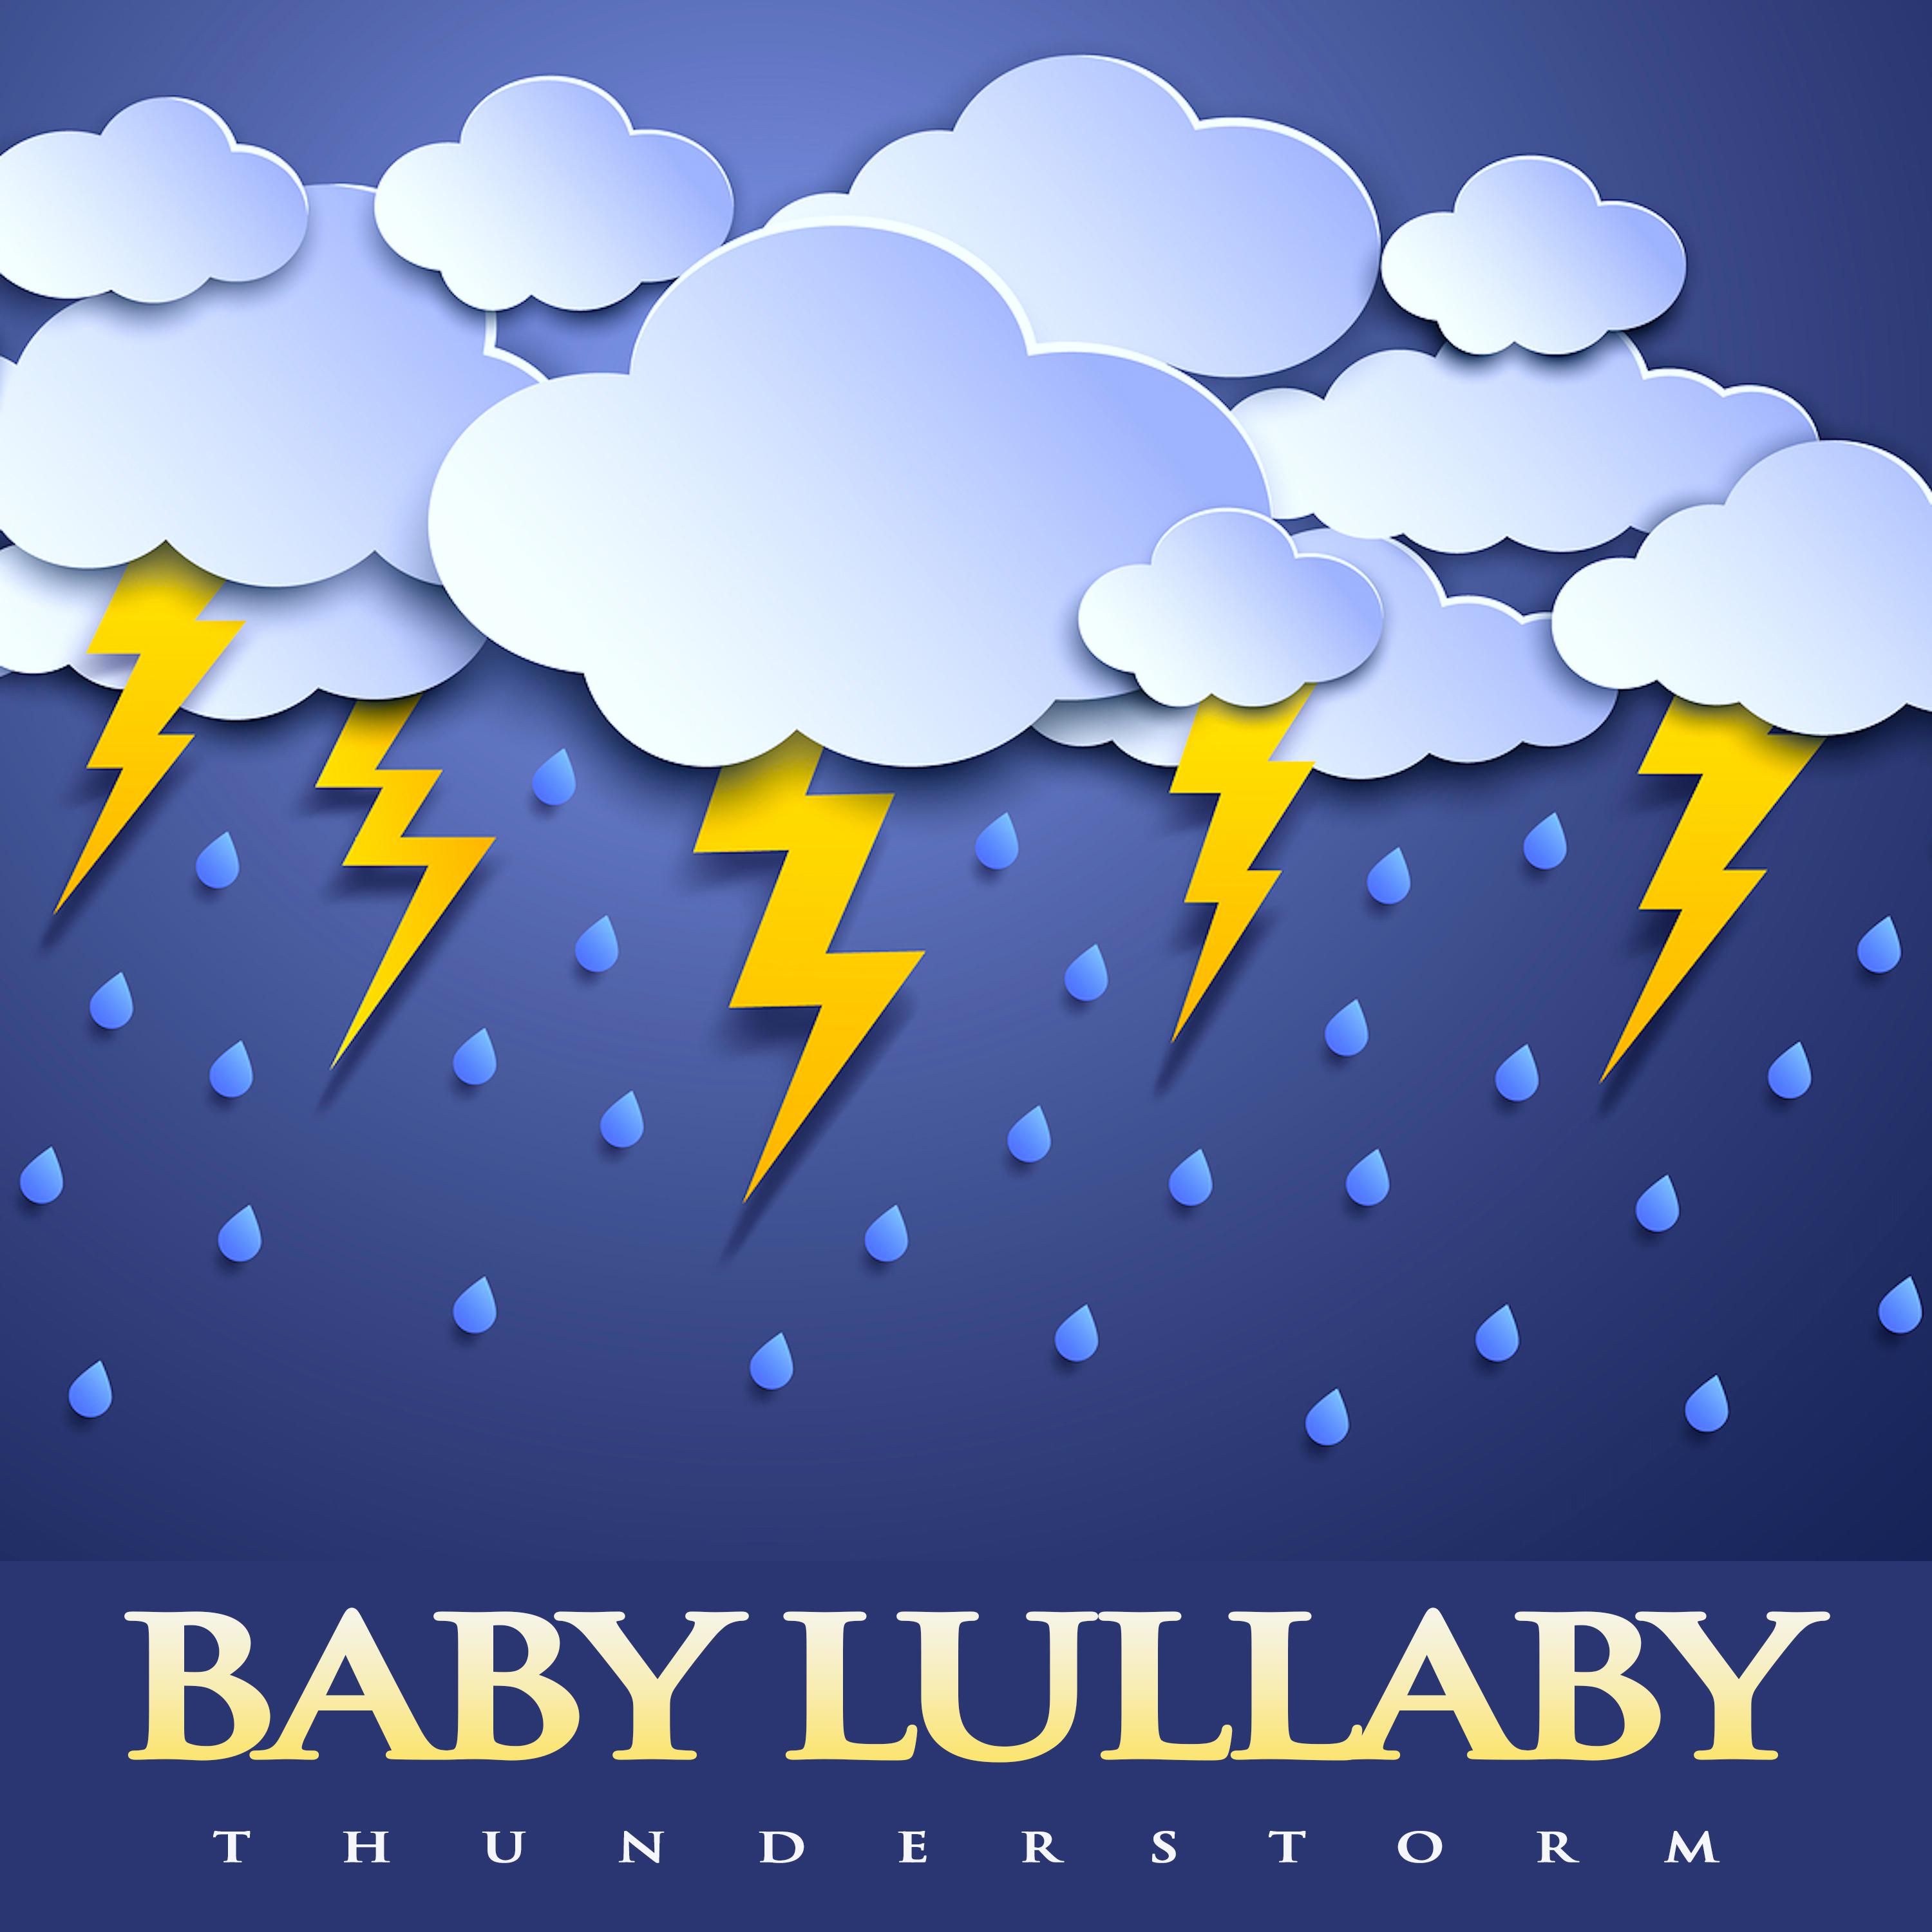 Piano Music For Babies With Thunderstorm Sounds